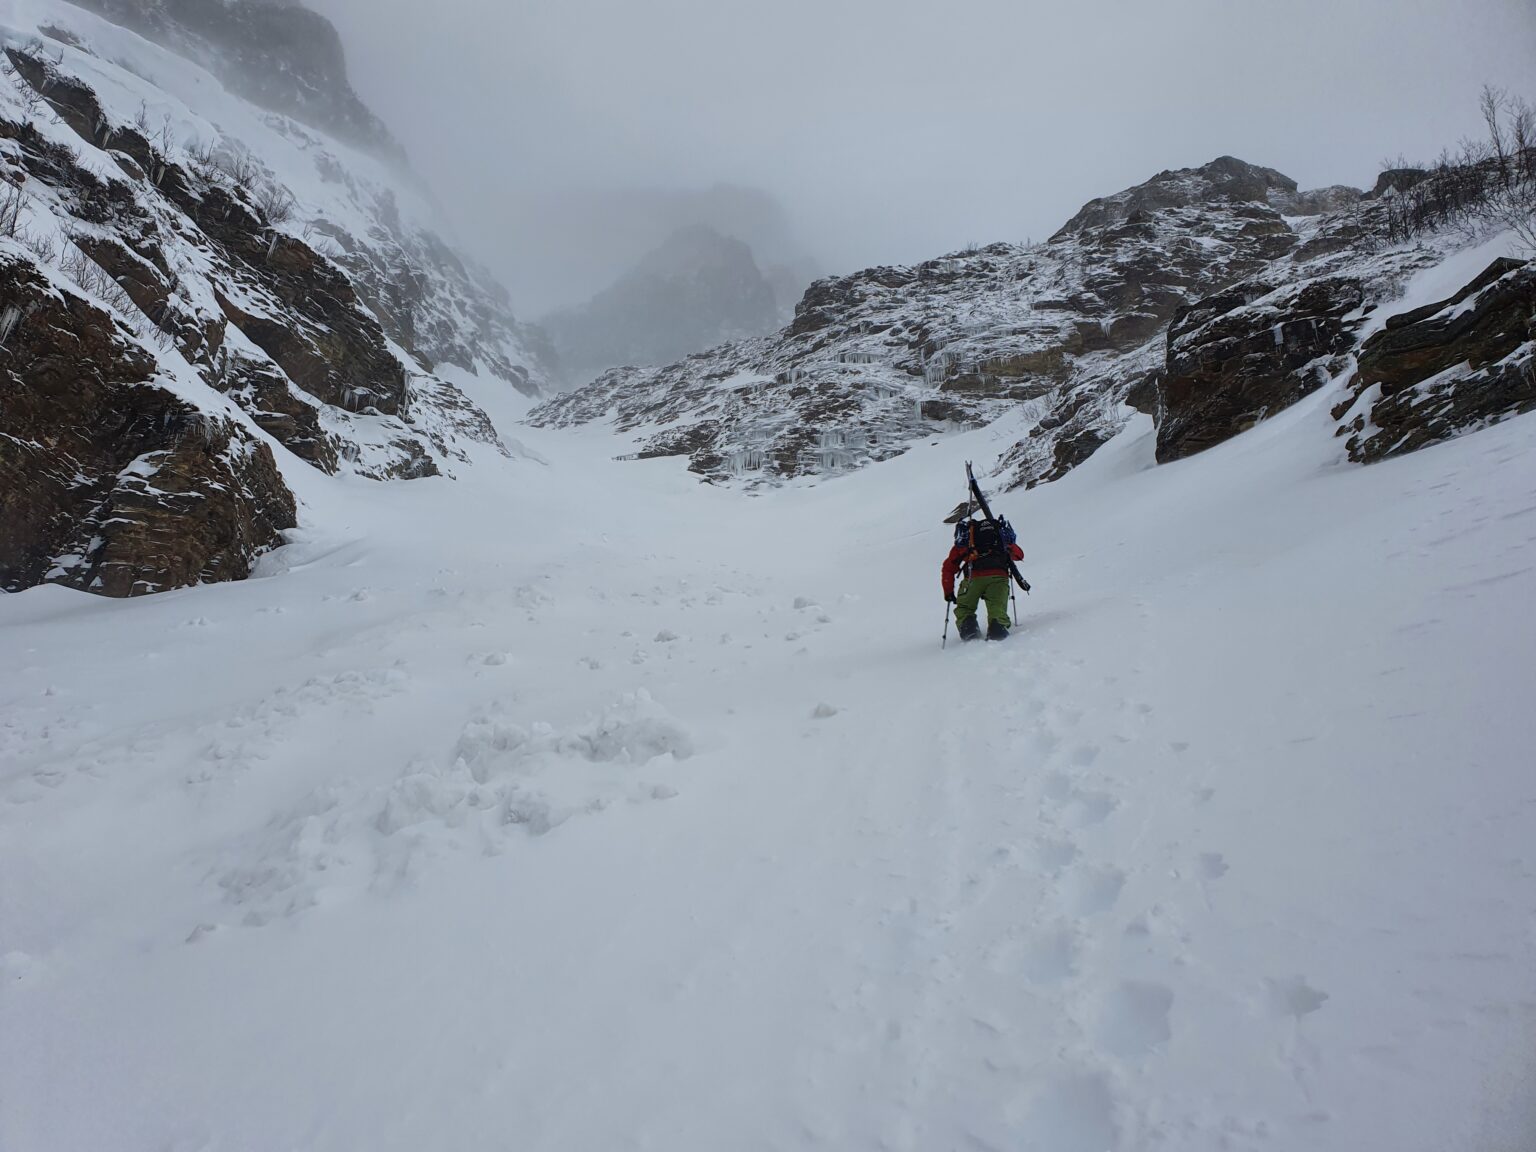 Climbing up the lower couloir on Rostafjellet